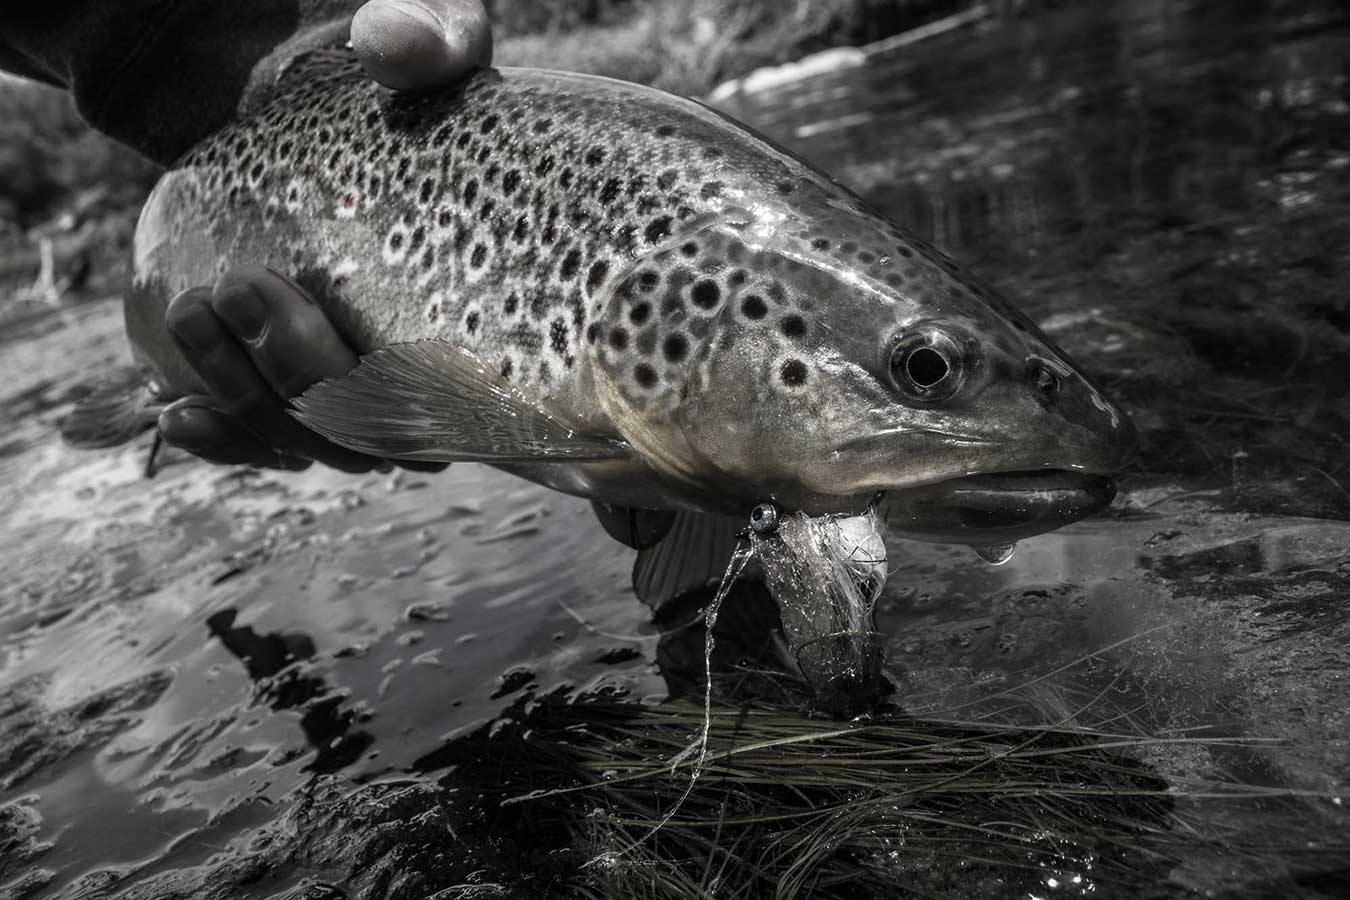 How to Fly Fish for Brook Trout: A Complete Beginners Guide - Guide  Recommended